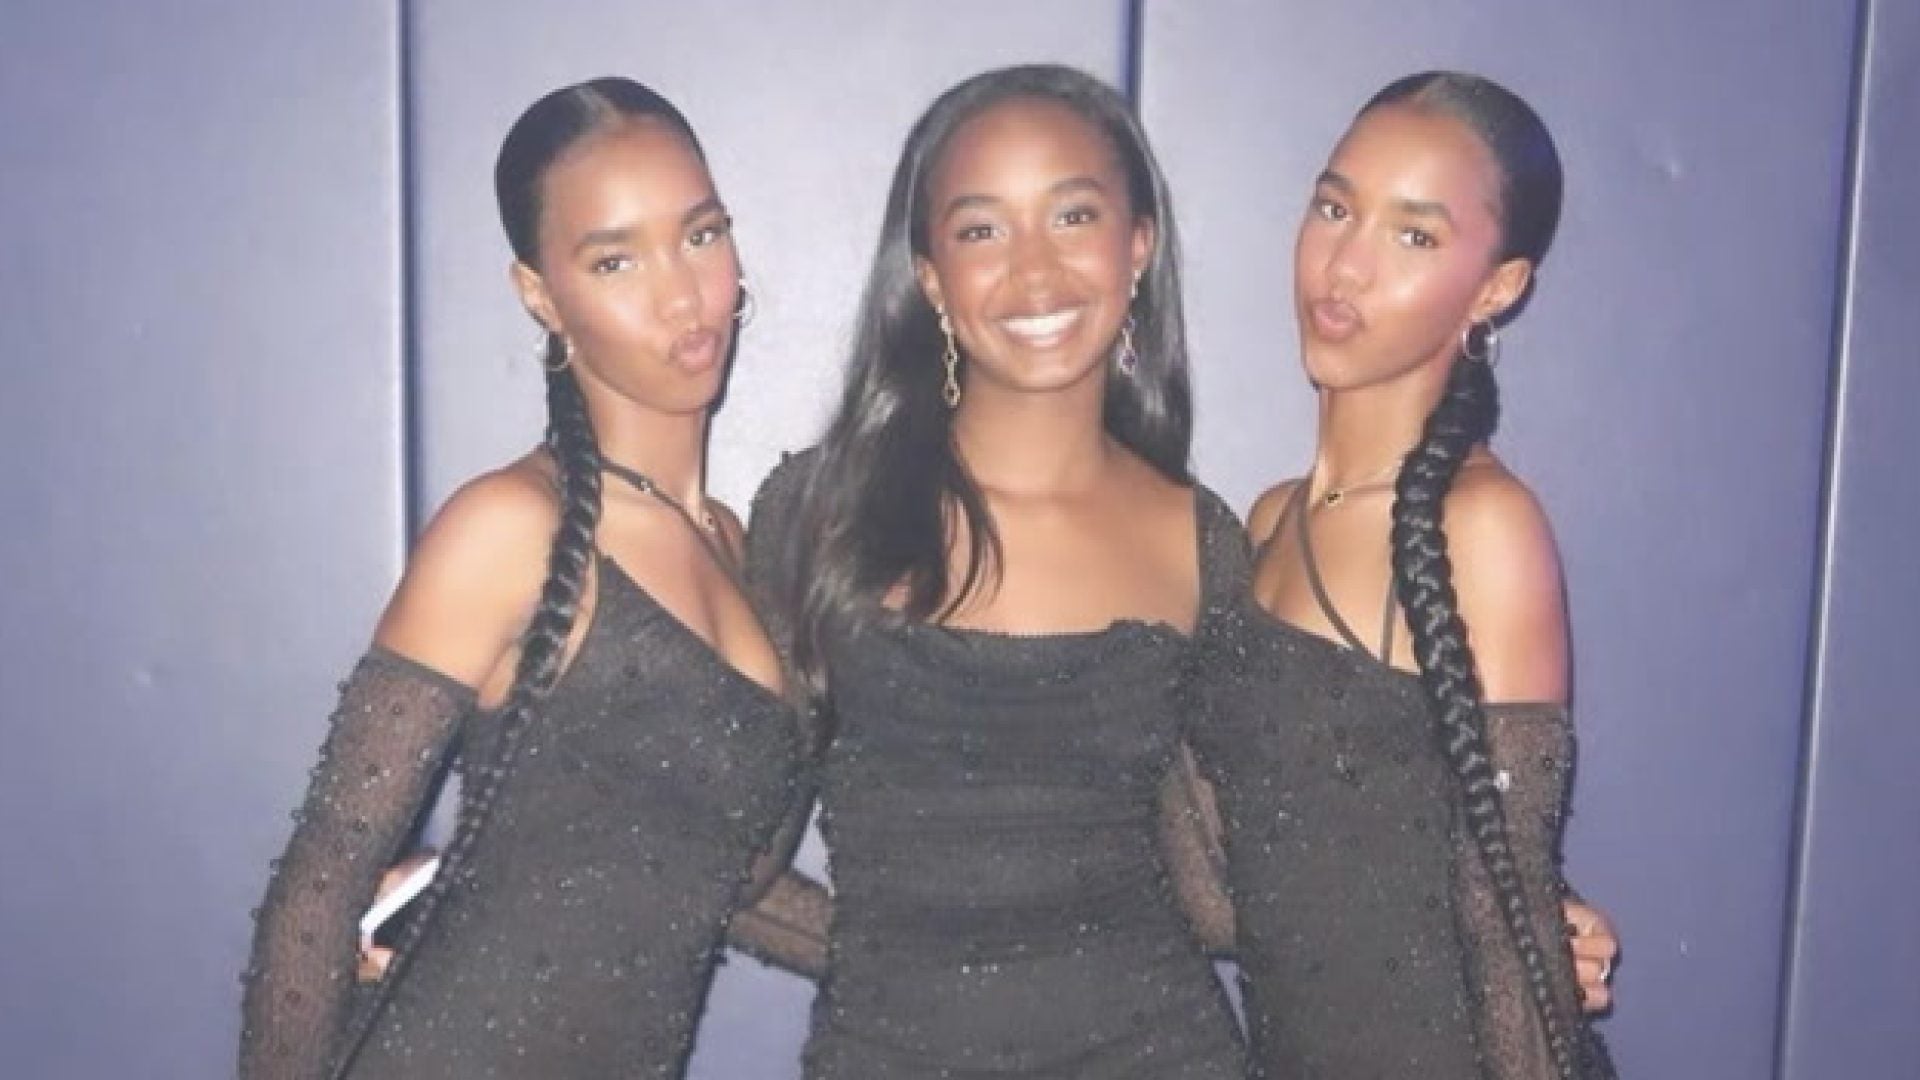 WATCH: In My Feed – The Combs Sisters Match Head to Toe for Homecoming Dance